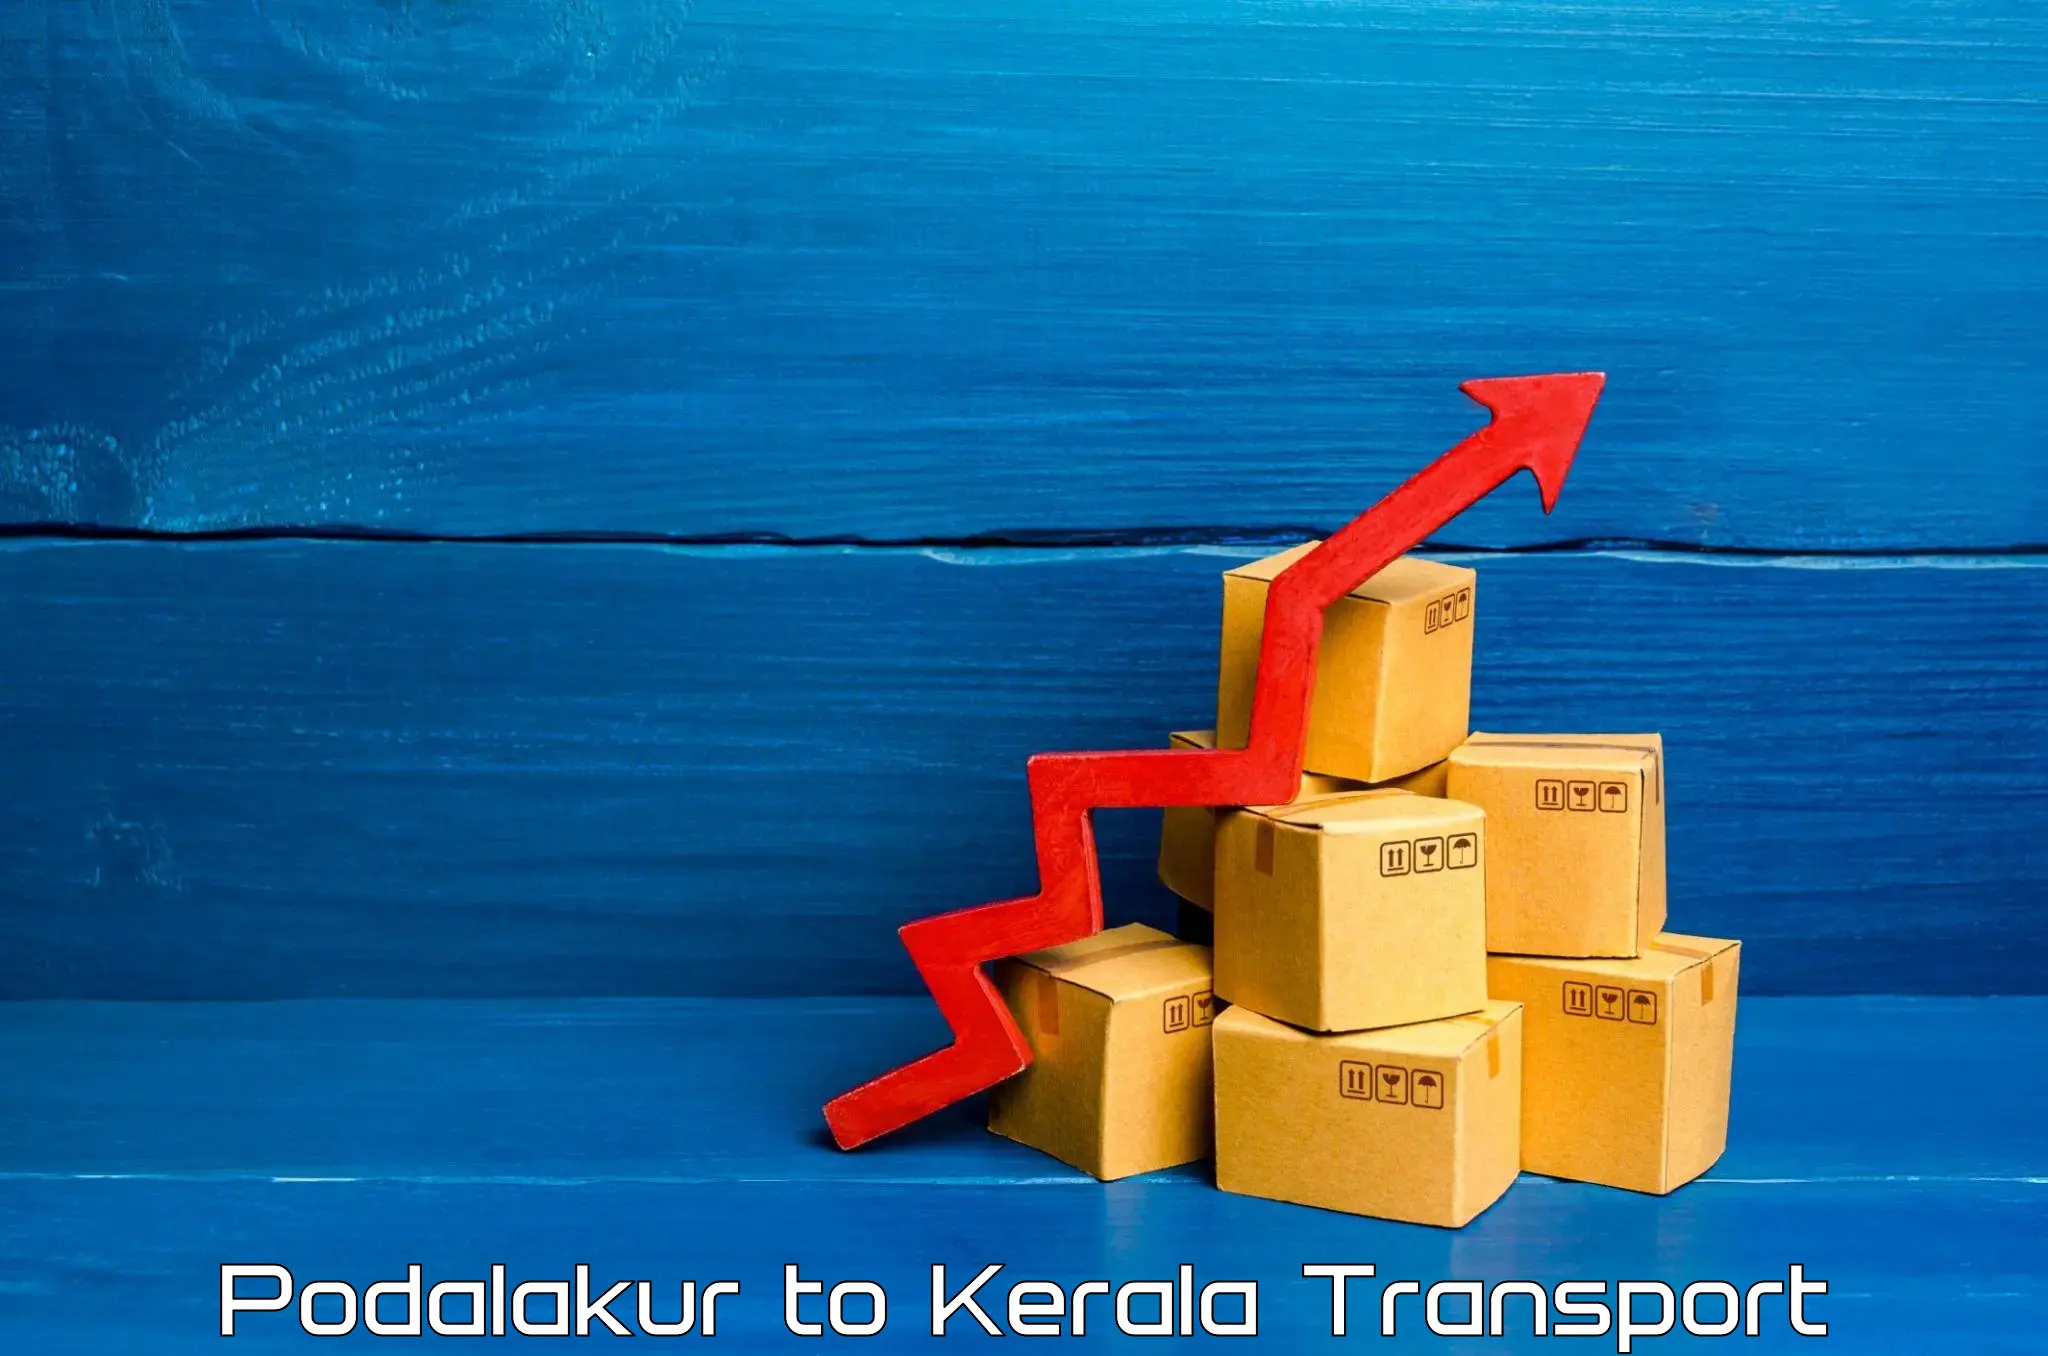 Nearby transport service Podalakur to Trivandrum